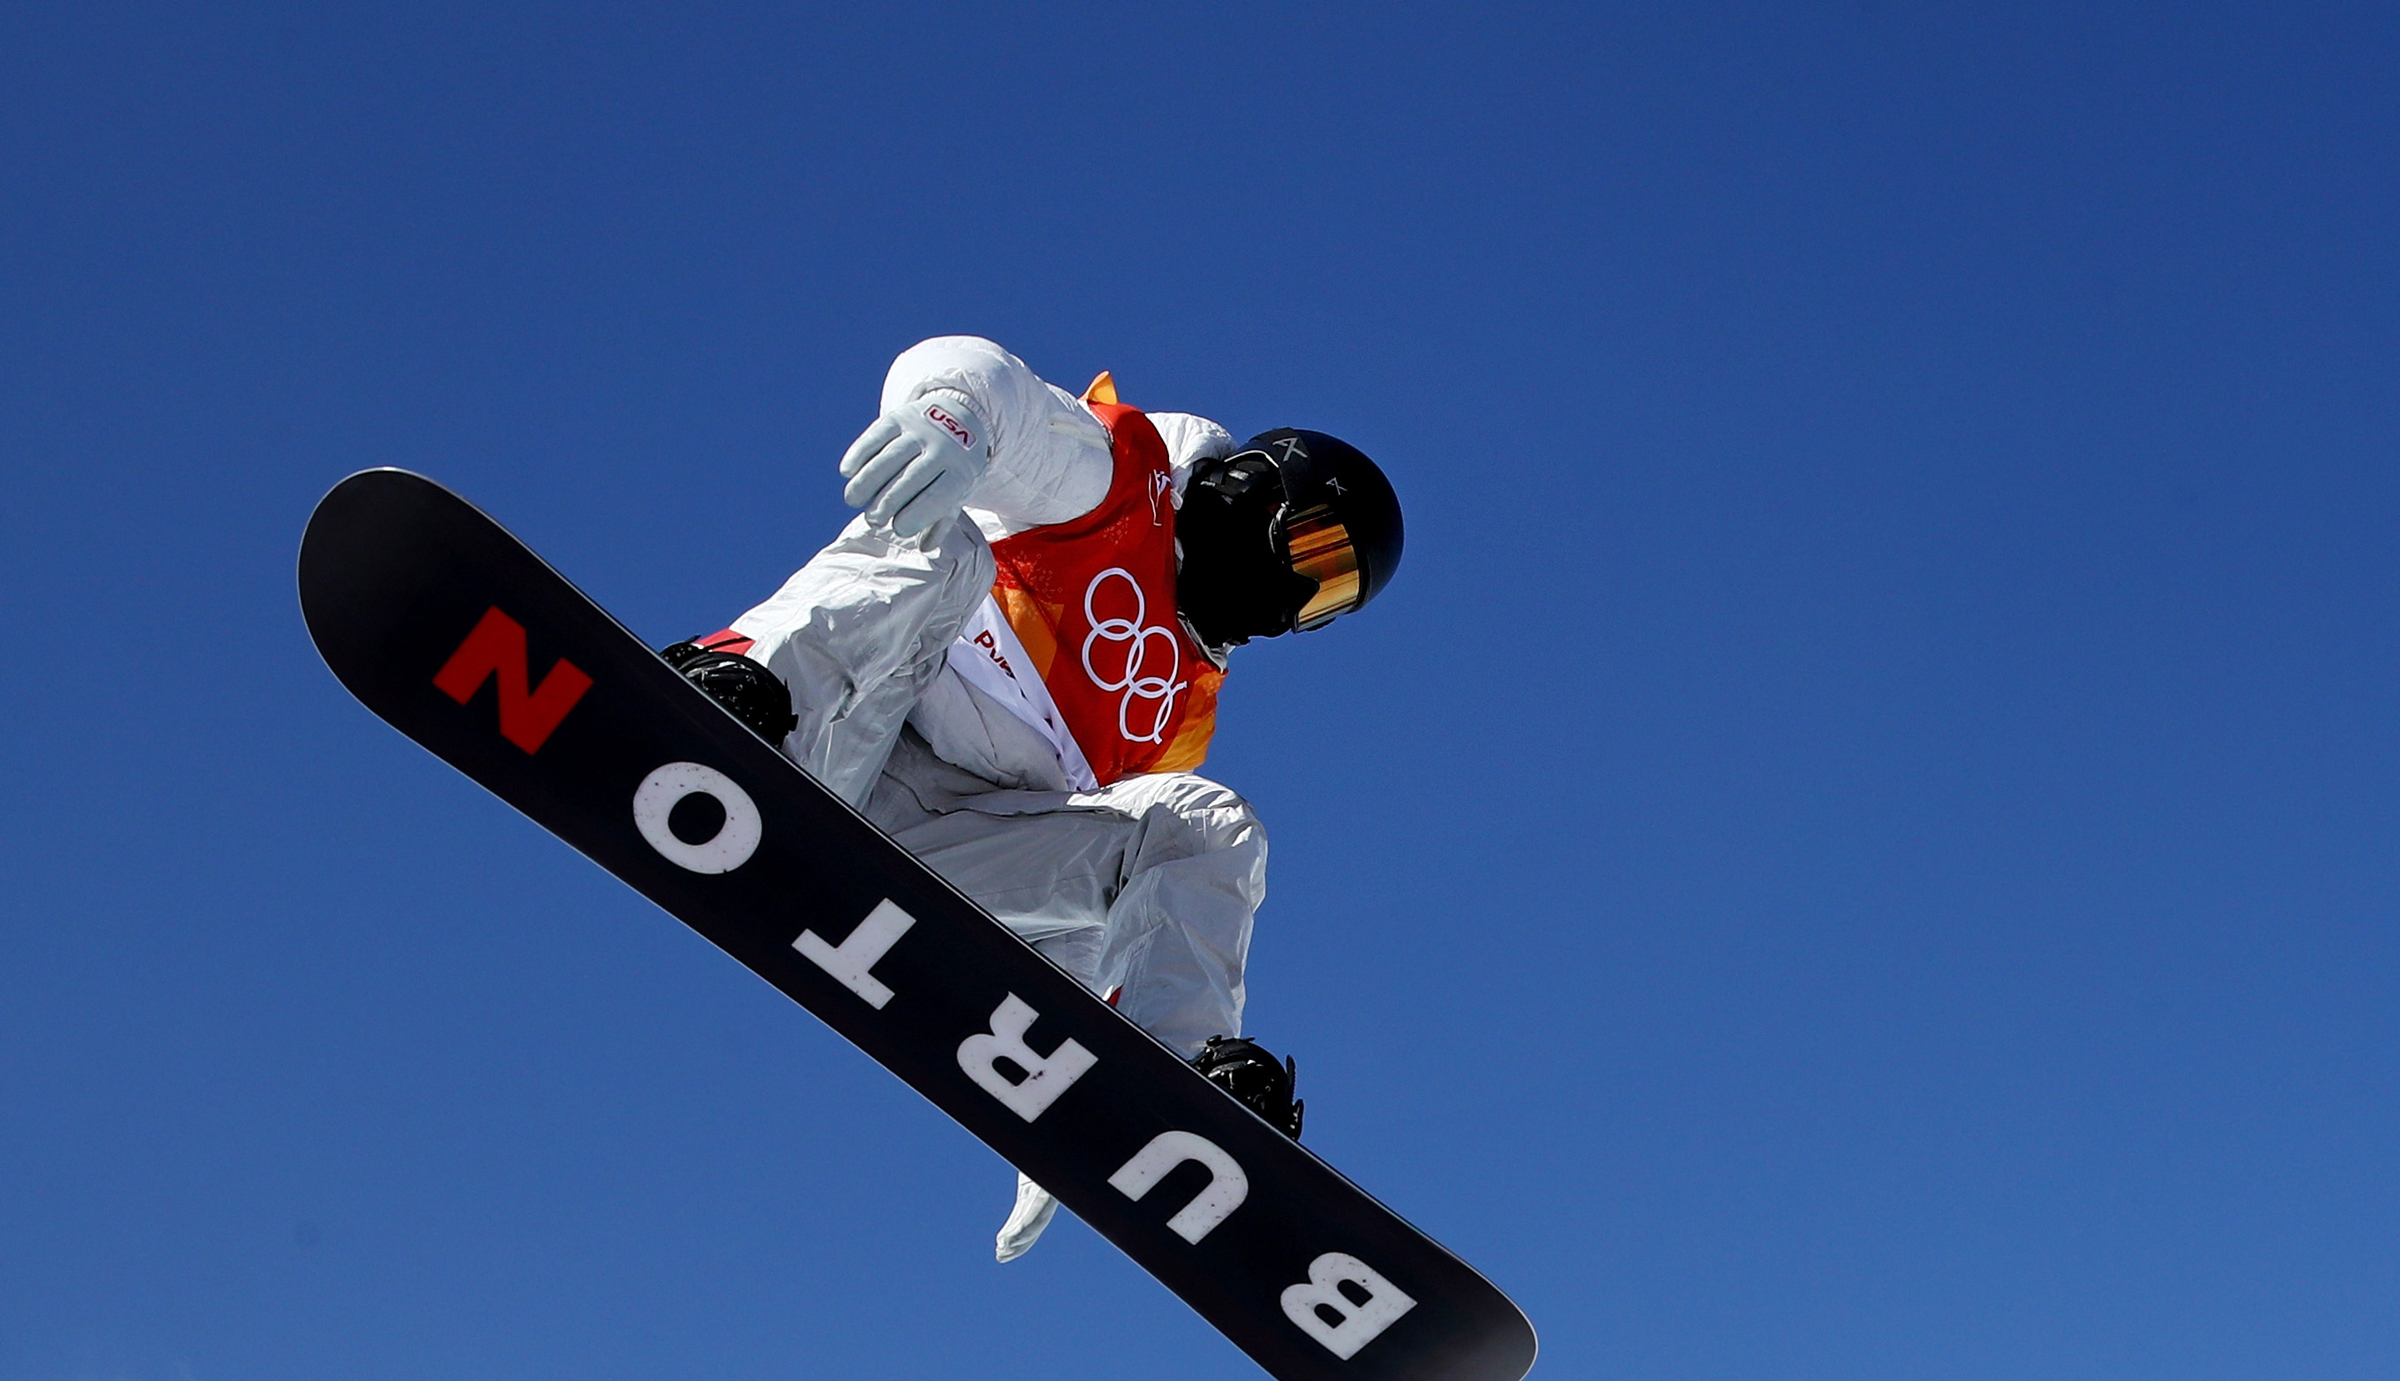 Shaun White led four Americans in Tuesday's halfpipe qualifying. (Getty Images - Clive Rose)